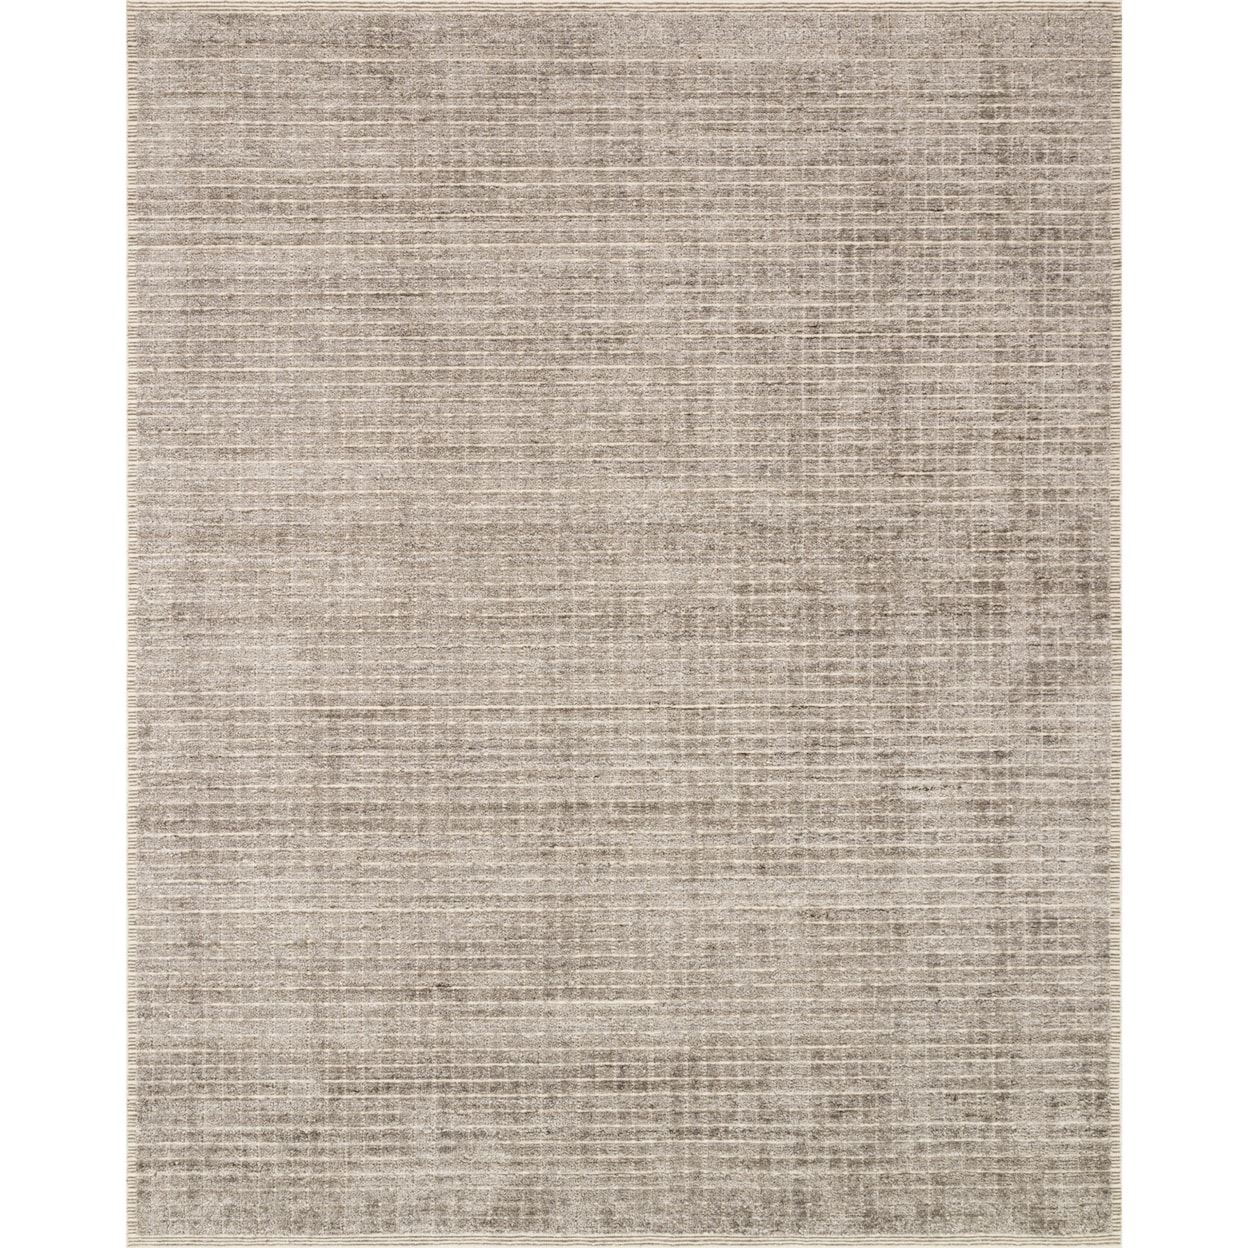 Reeds Rugs Beverly 5'6" x 8'6" Stone Rug